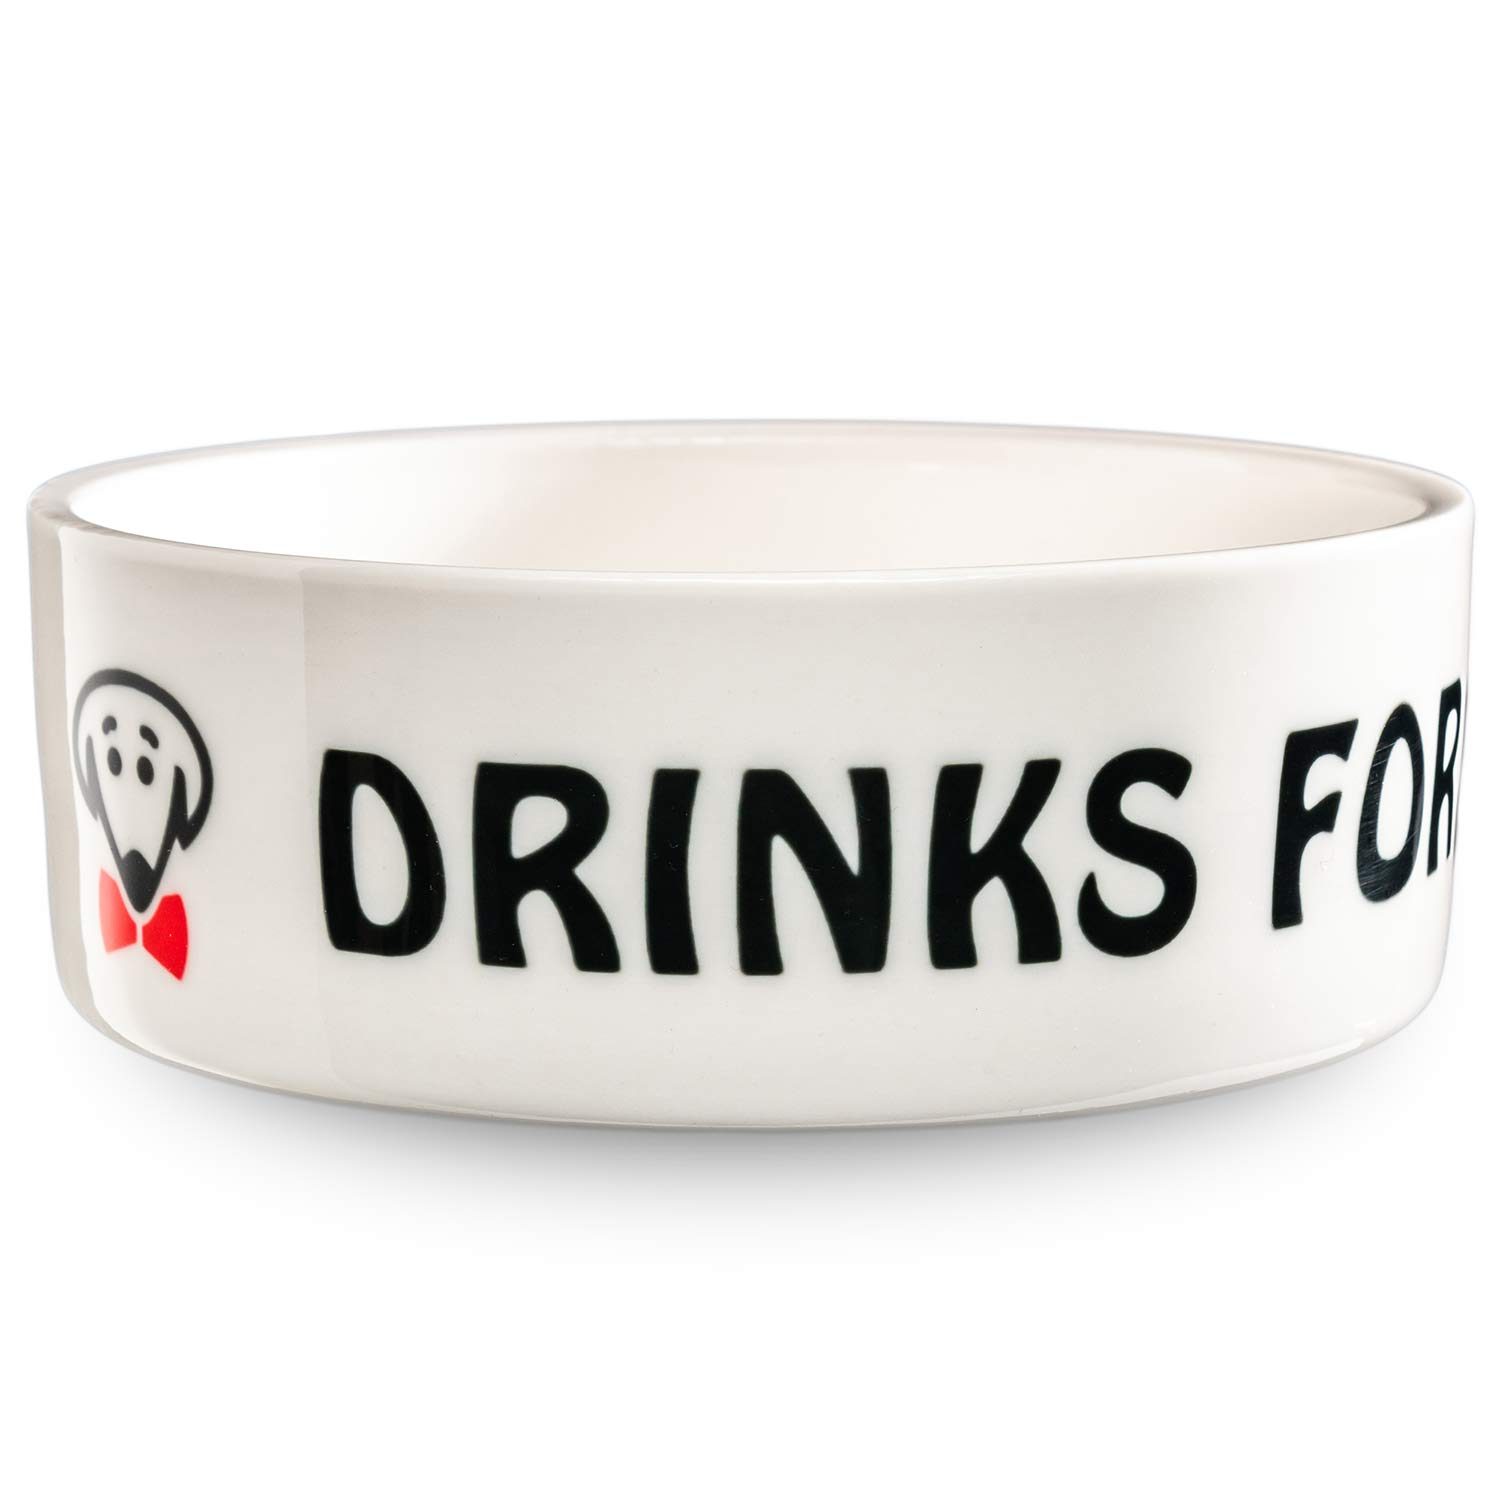 Drinks for the Boss pet bowl in white by Beau Tyler